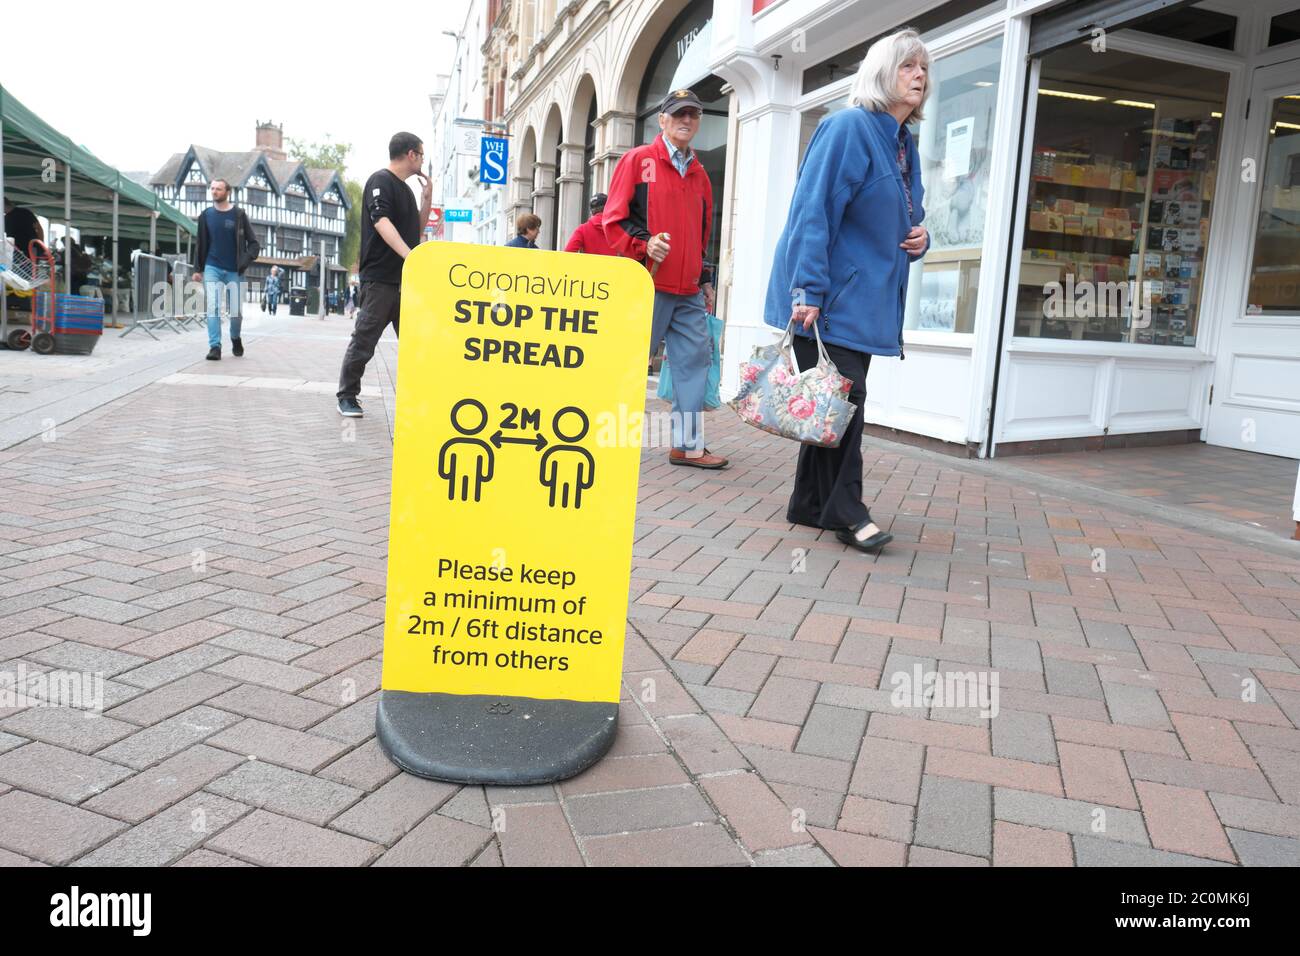 Hereford, Herefordshire UK - Friday 12th June 2020 - New signs and instructions appear as shops and businesses prepare to re-open next week across England as Coronavirus lockdown guidelines are relaxed. Photo Steven May / Alamy Live News Stock Photo